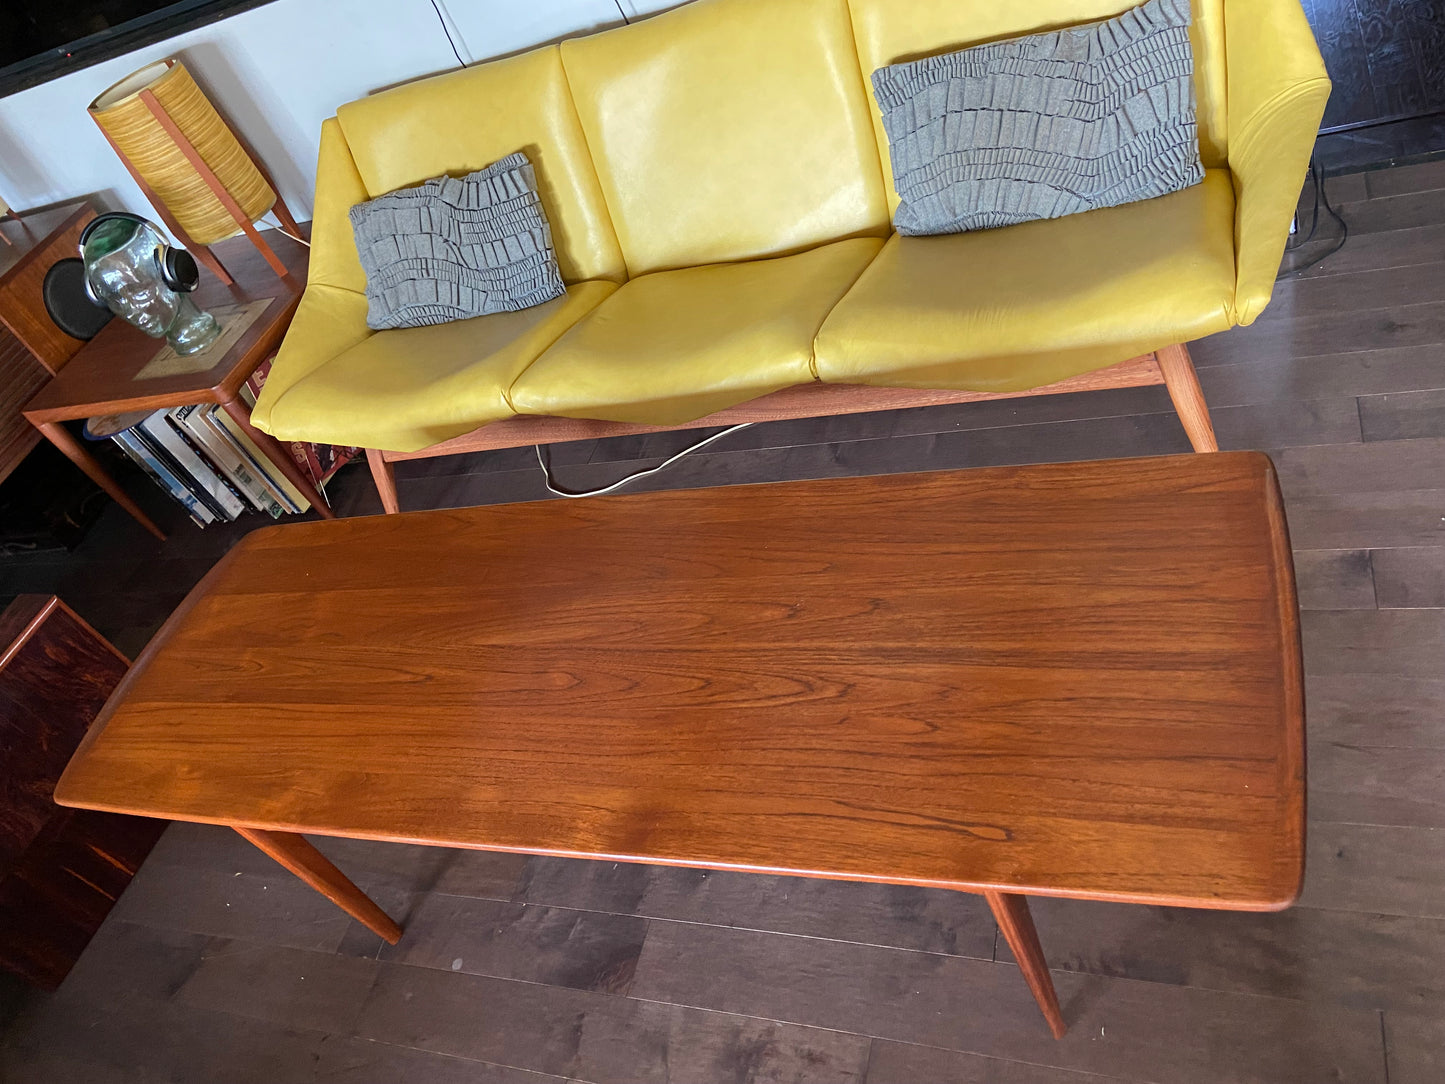 REFINISHED Mid Century Modern Solid Teak Coffee Table by France & Son, FD503, PERFECT